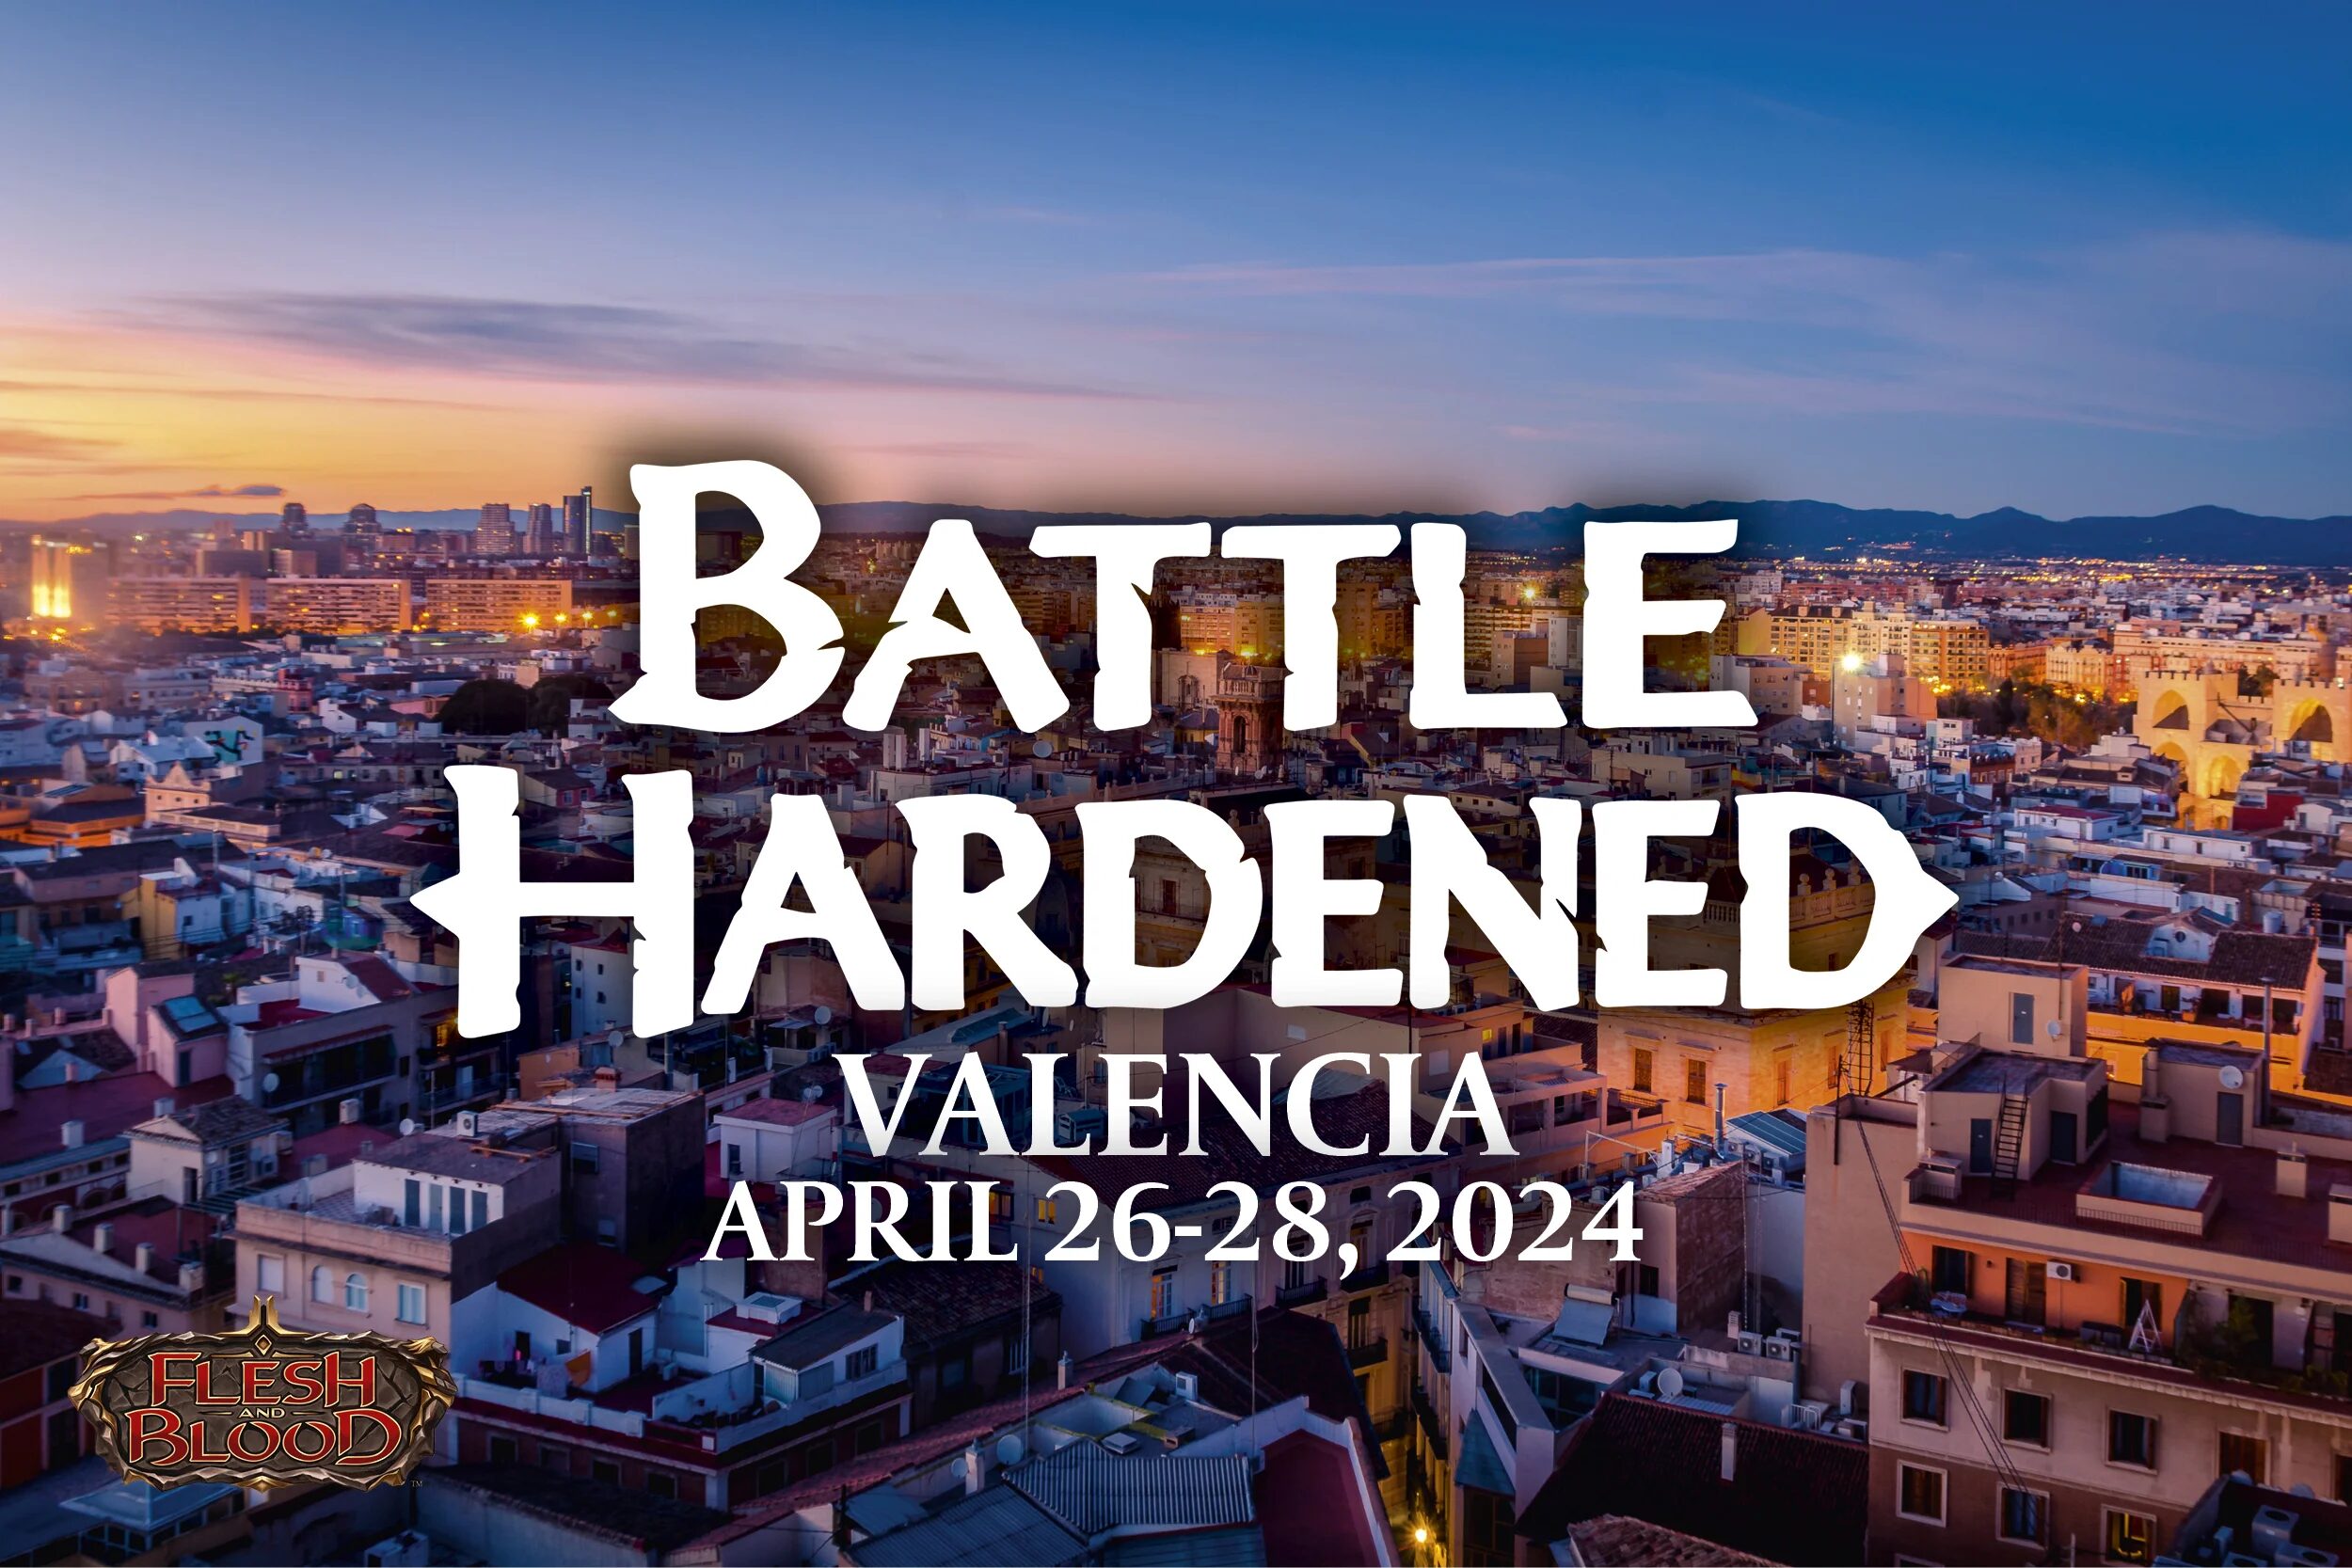 【Battle Hardened:Valencia】優勝は《Kayo, Armed and Dangerous》！ProQuest+はRiptideが全勝！